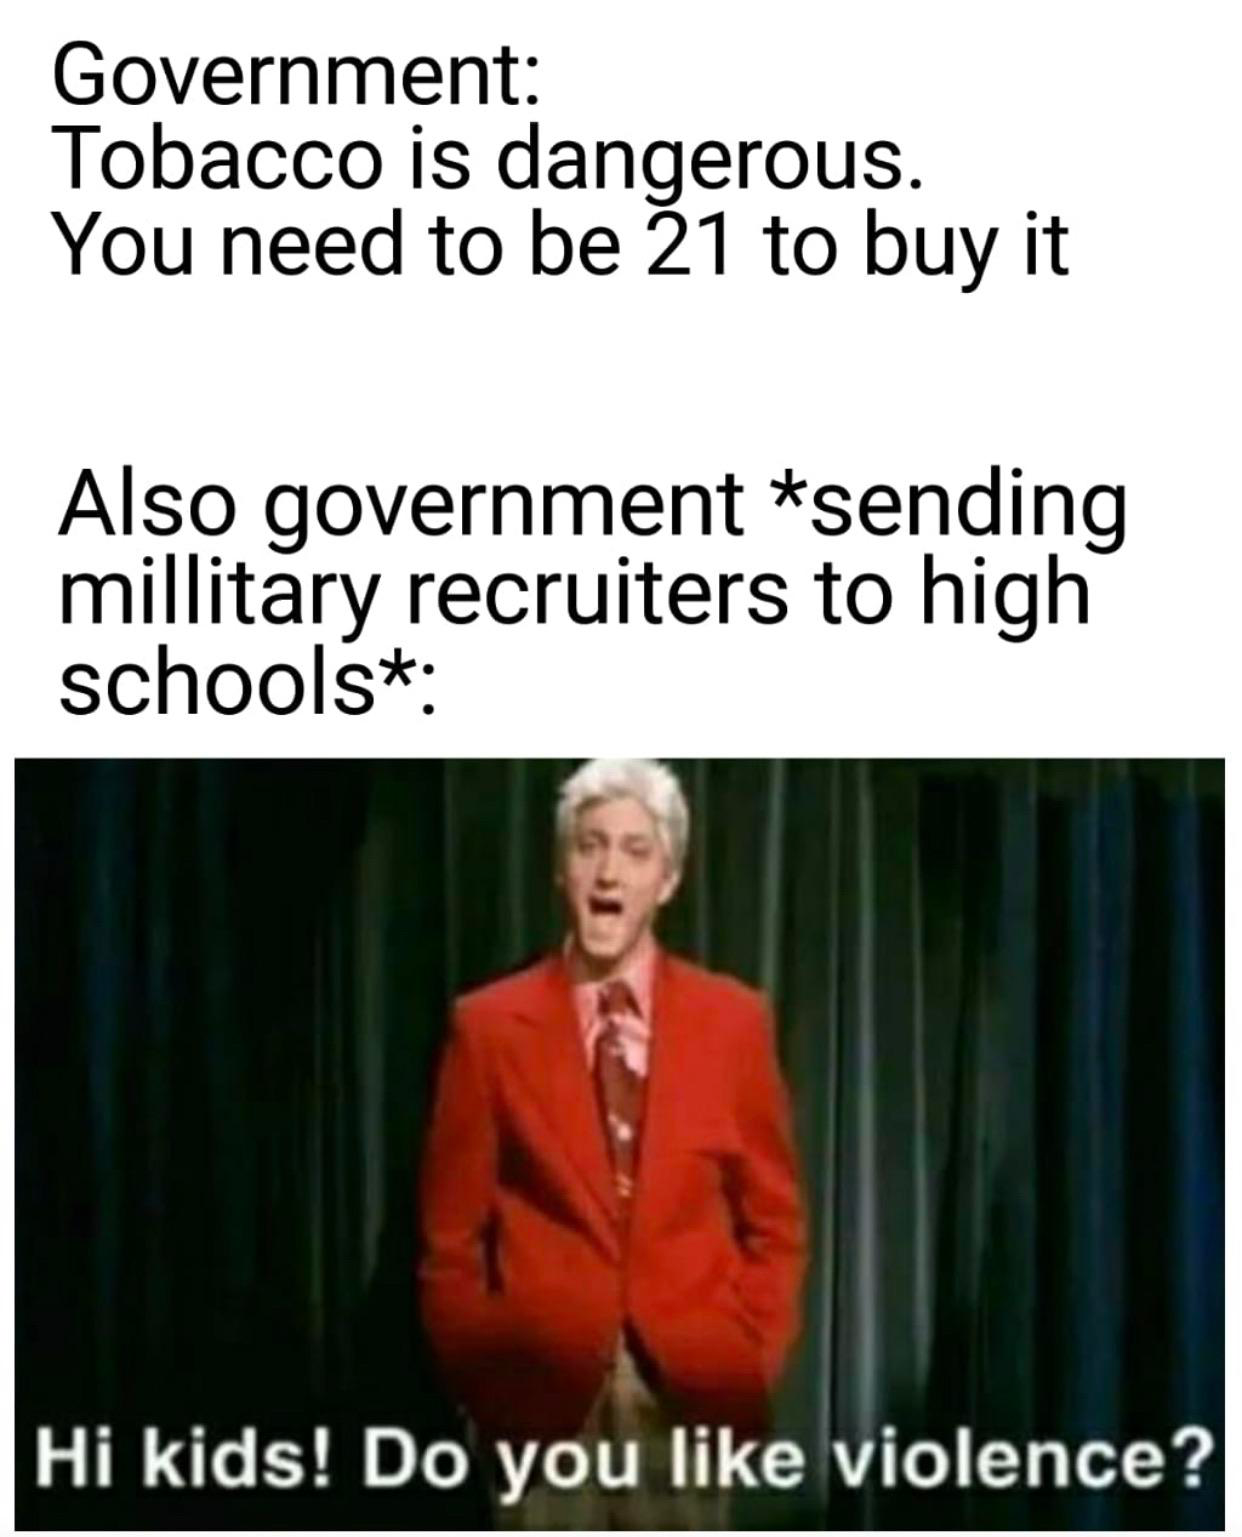 photo caption - Government Tobacco is dangerous. You need to be 21 to buy it Also government sending millitary recruiters to high schools Hi kids! Do you violence?